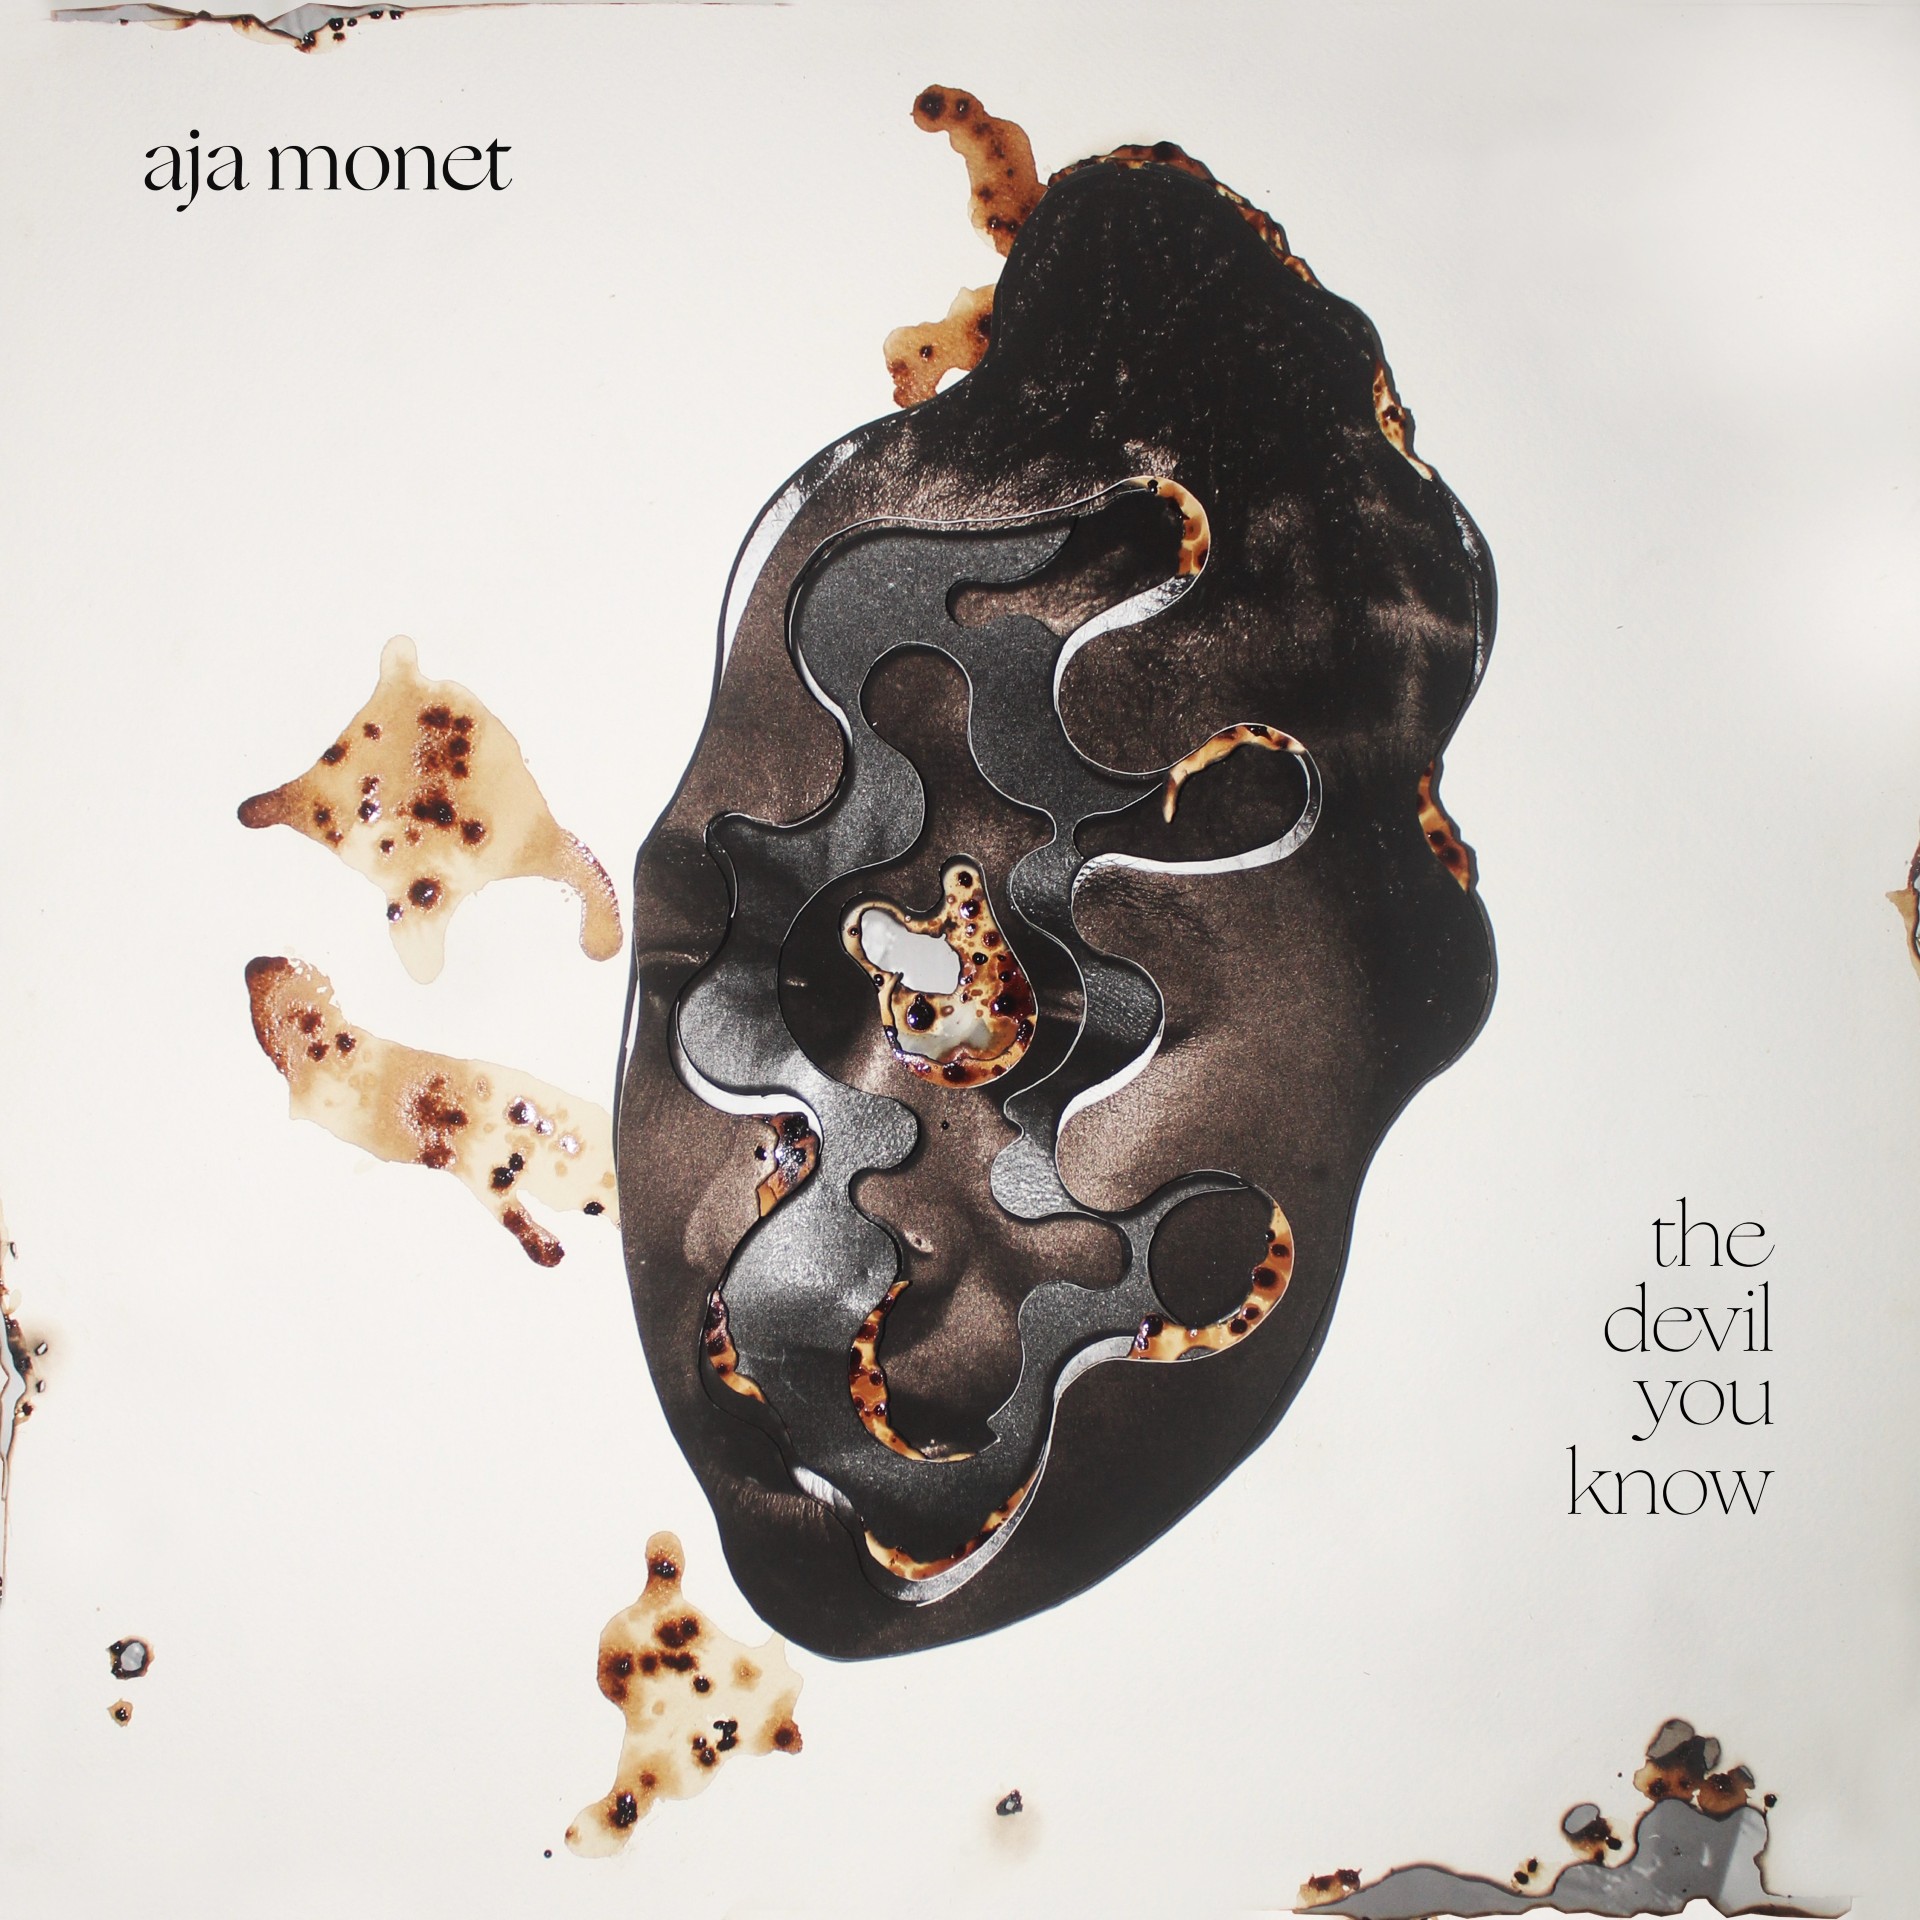 Artwork for the single “The Devil You Know” by aja monet